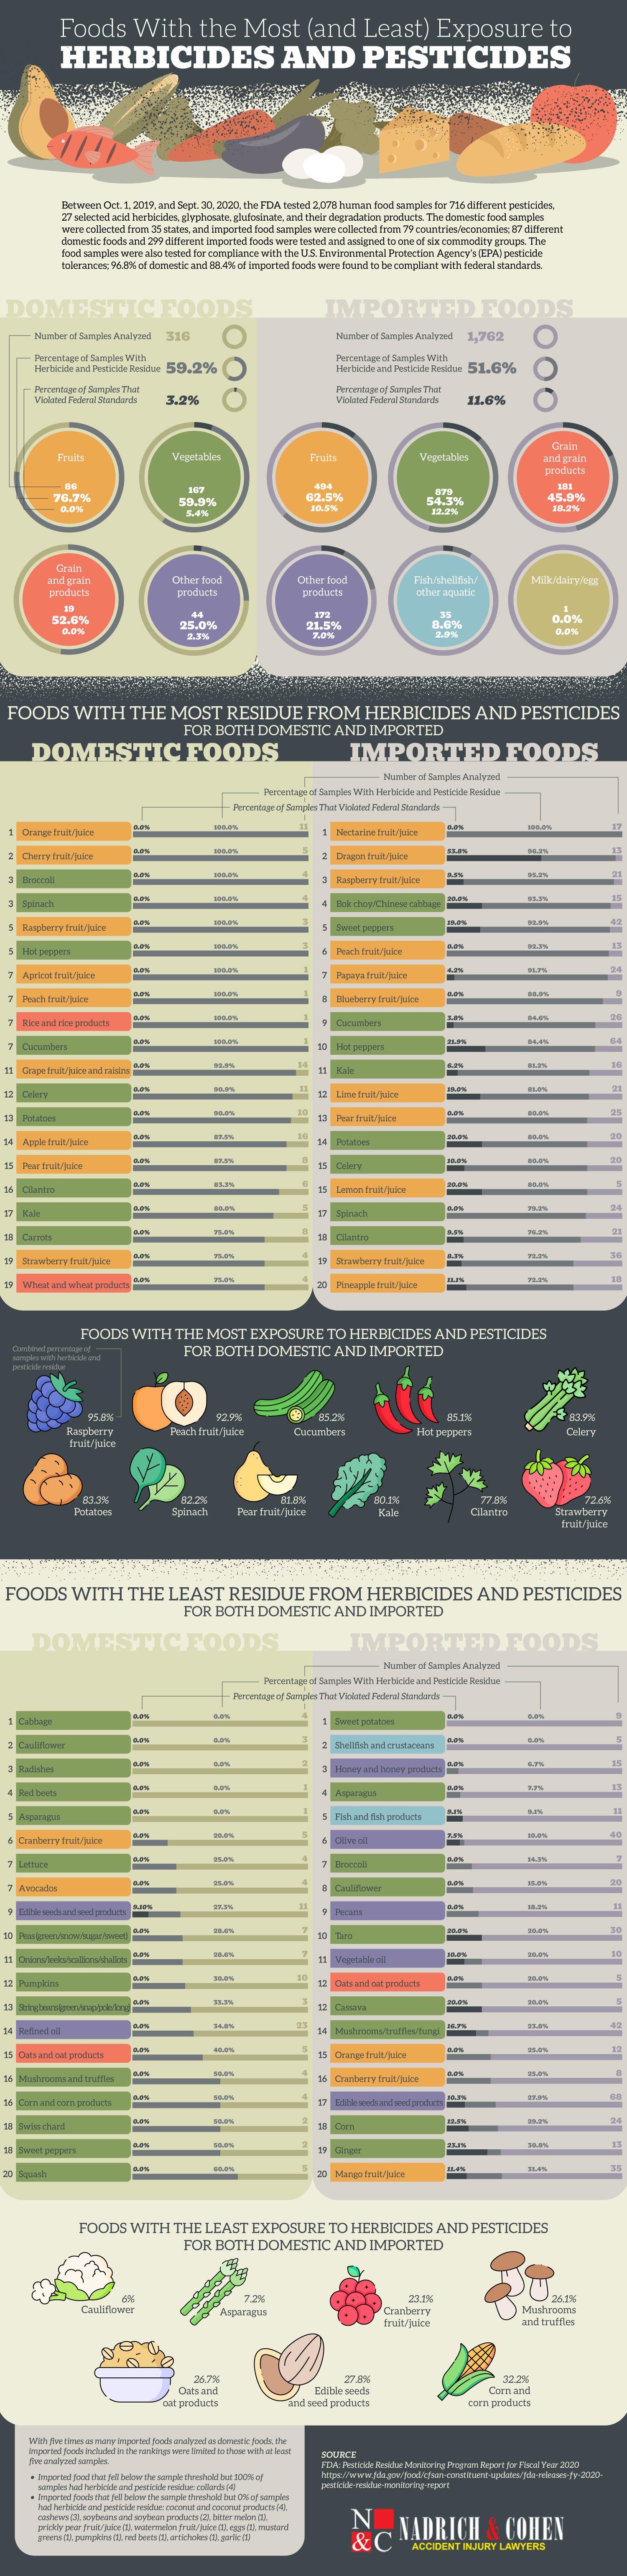 foods-most-pesticides-chartistry